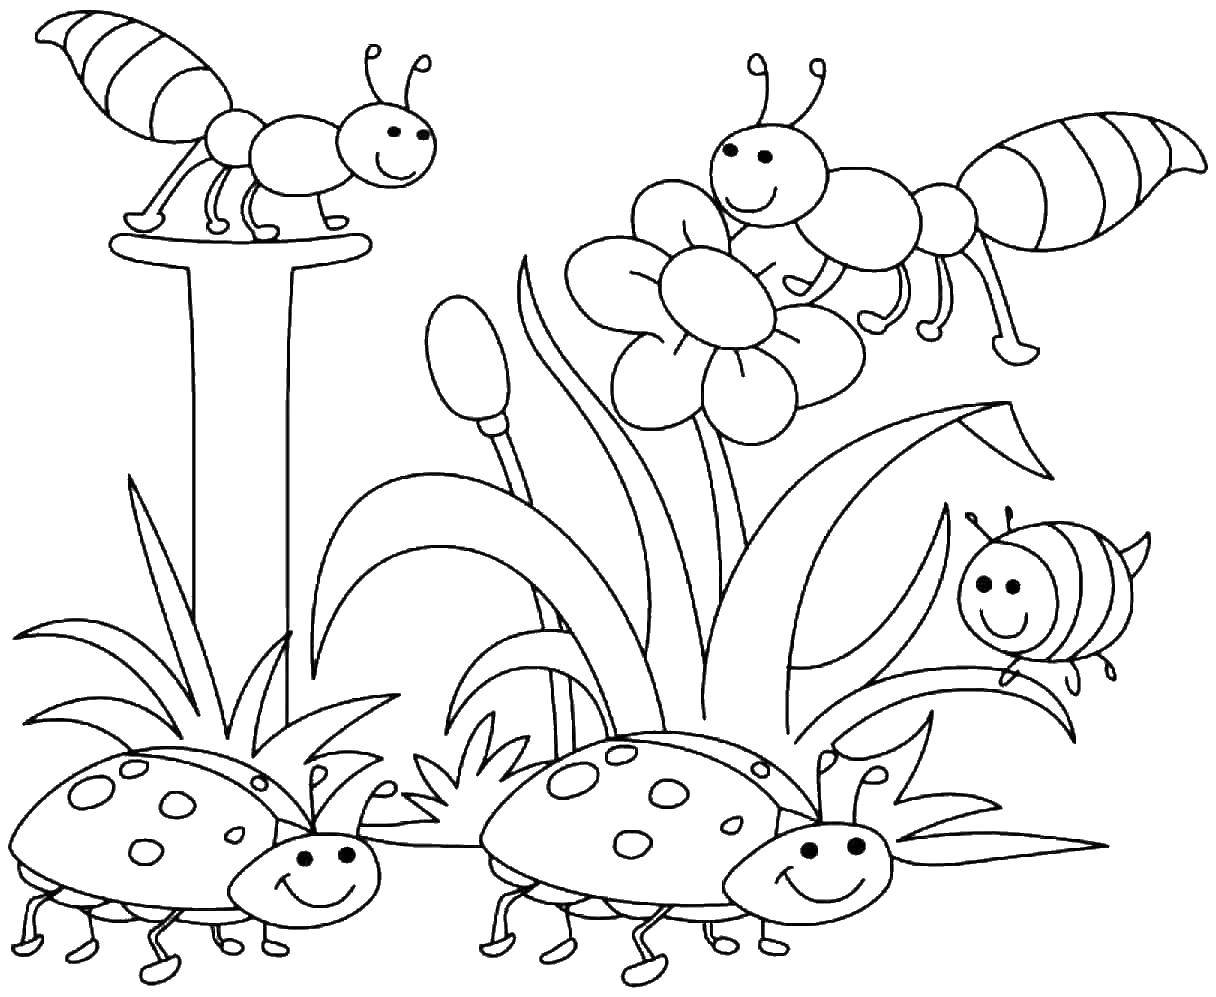 Coloring Insects. Category Insects. Tags:  insects.